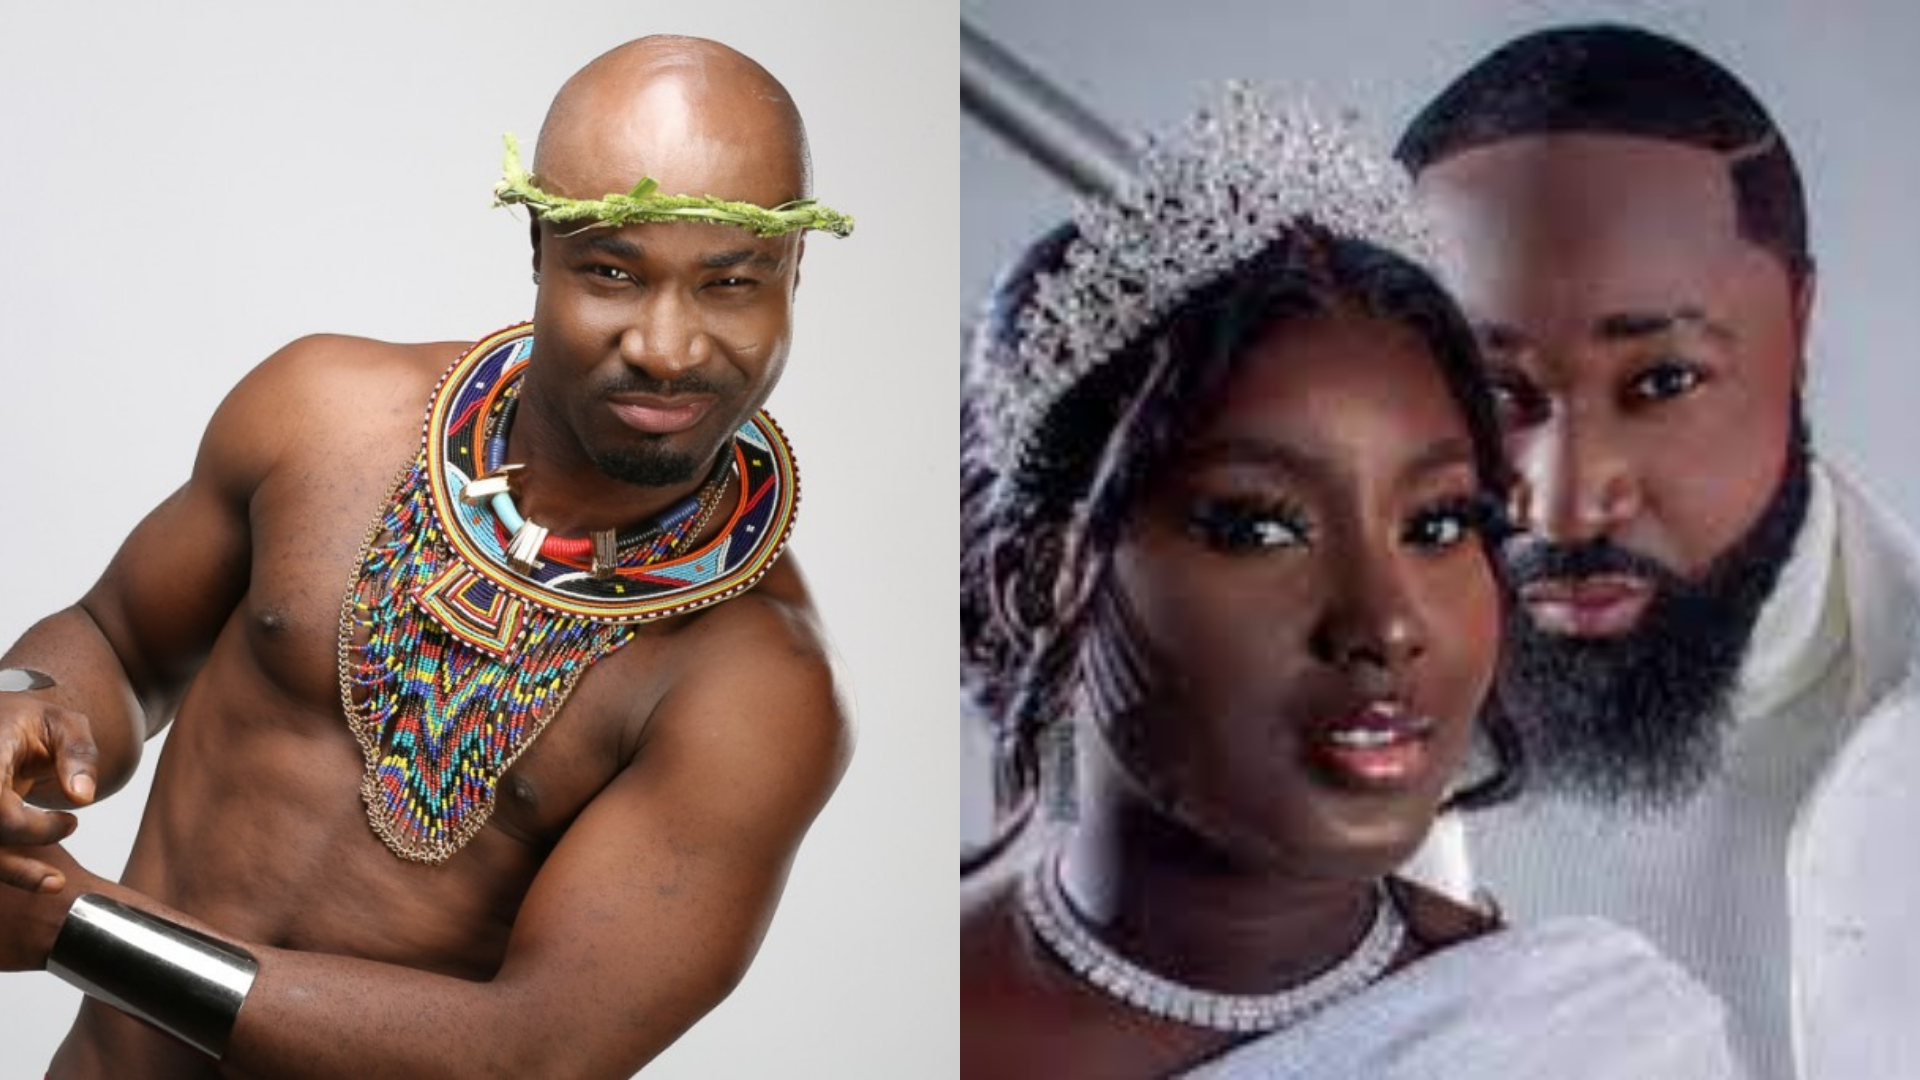 Nigerian singer Harrison Okori, popularly known as Harrysong, has recently revealed that he would consider marrying a second wife, but only if his current wife agrees to it.